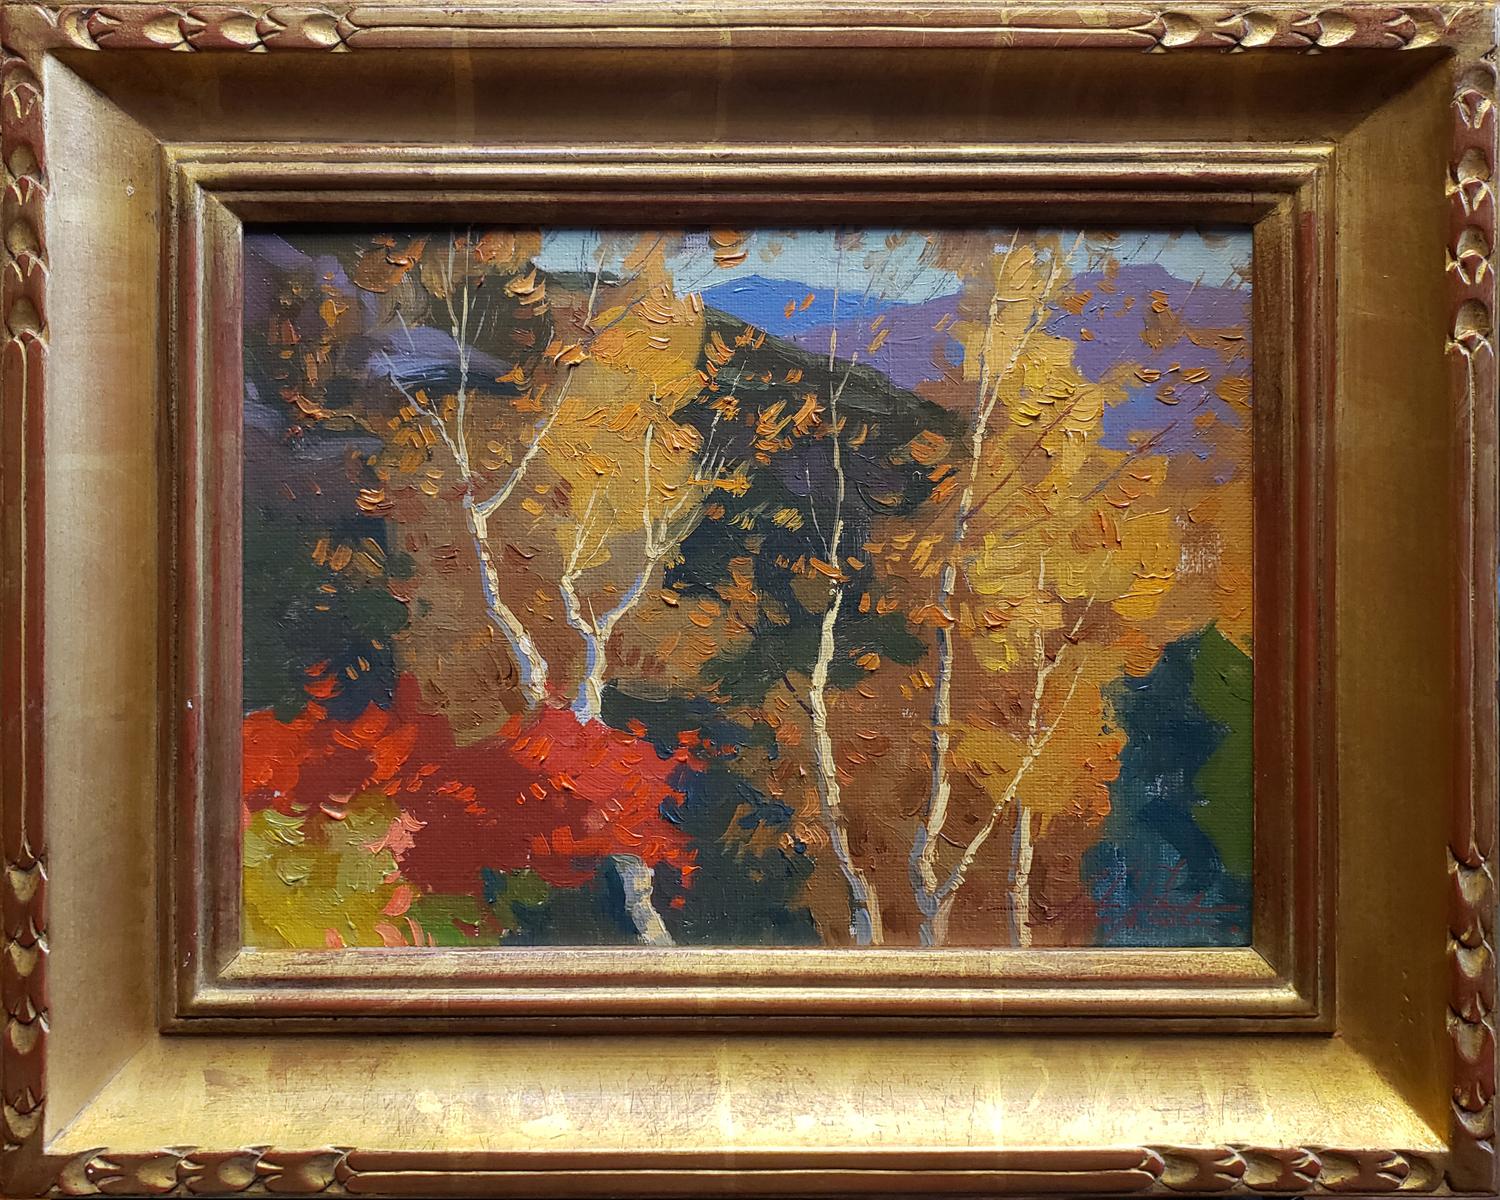 Colors of the Fall - Painting by Alexey Steele